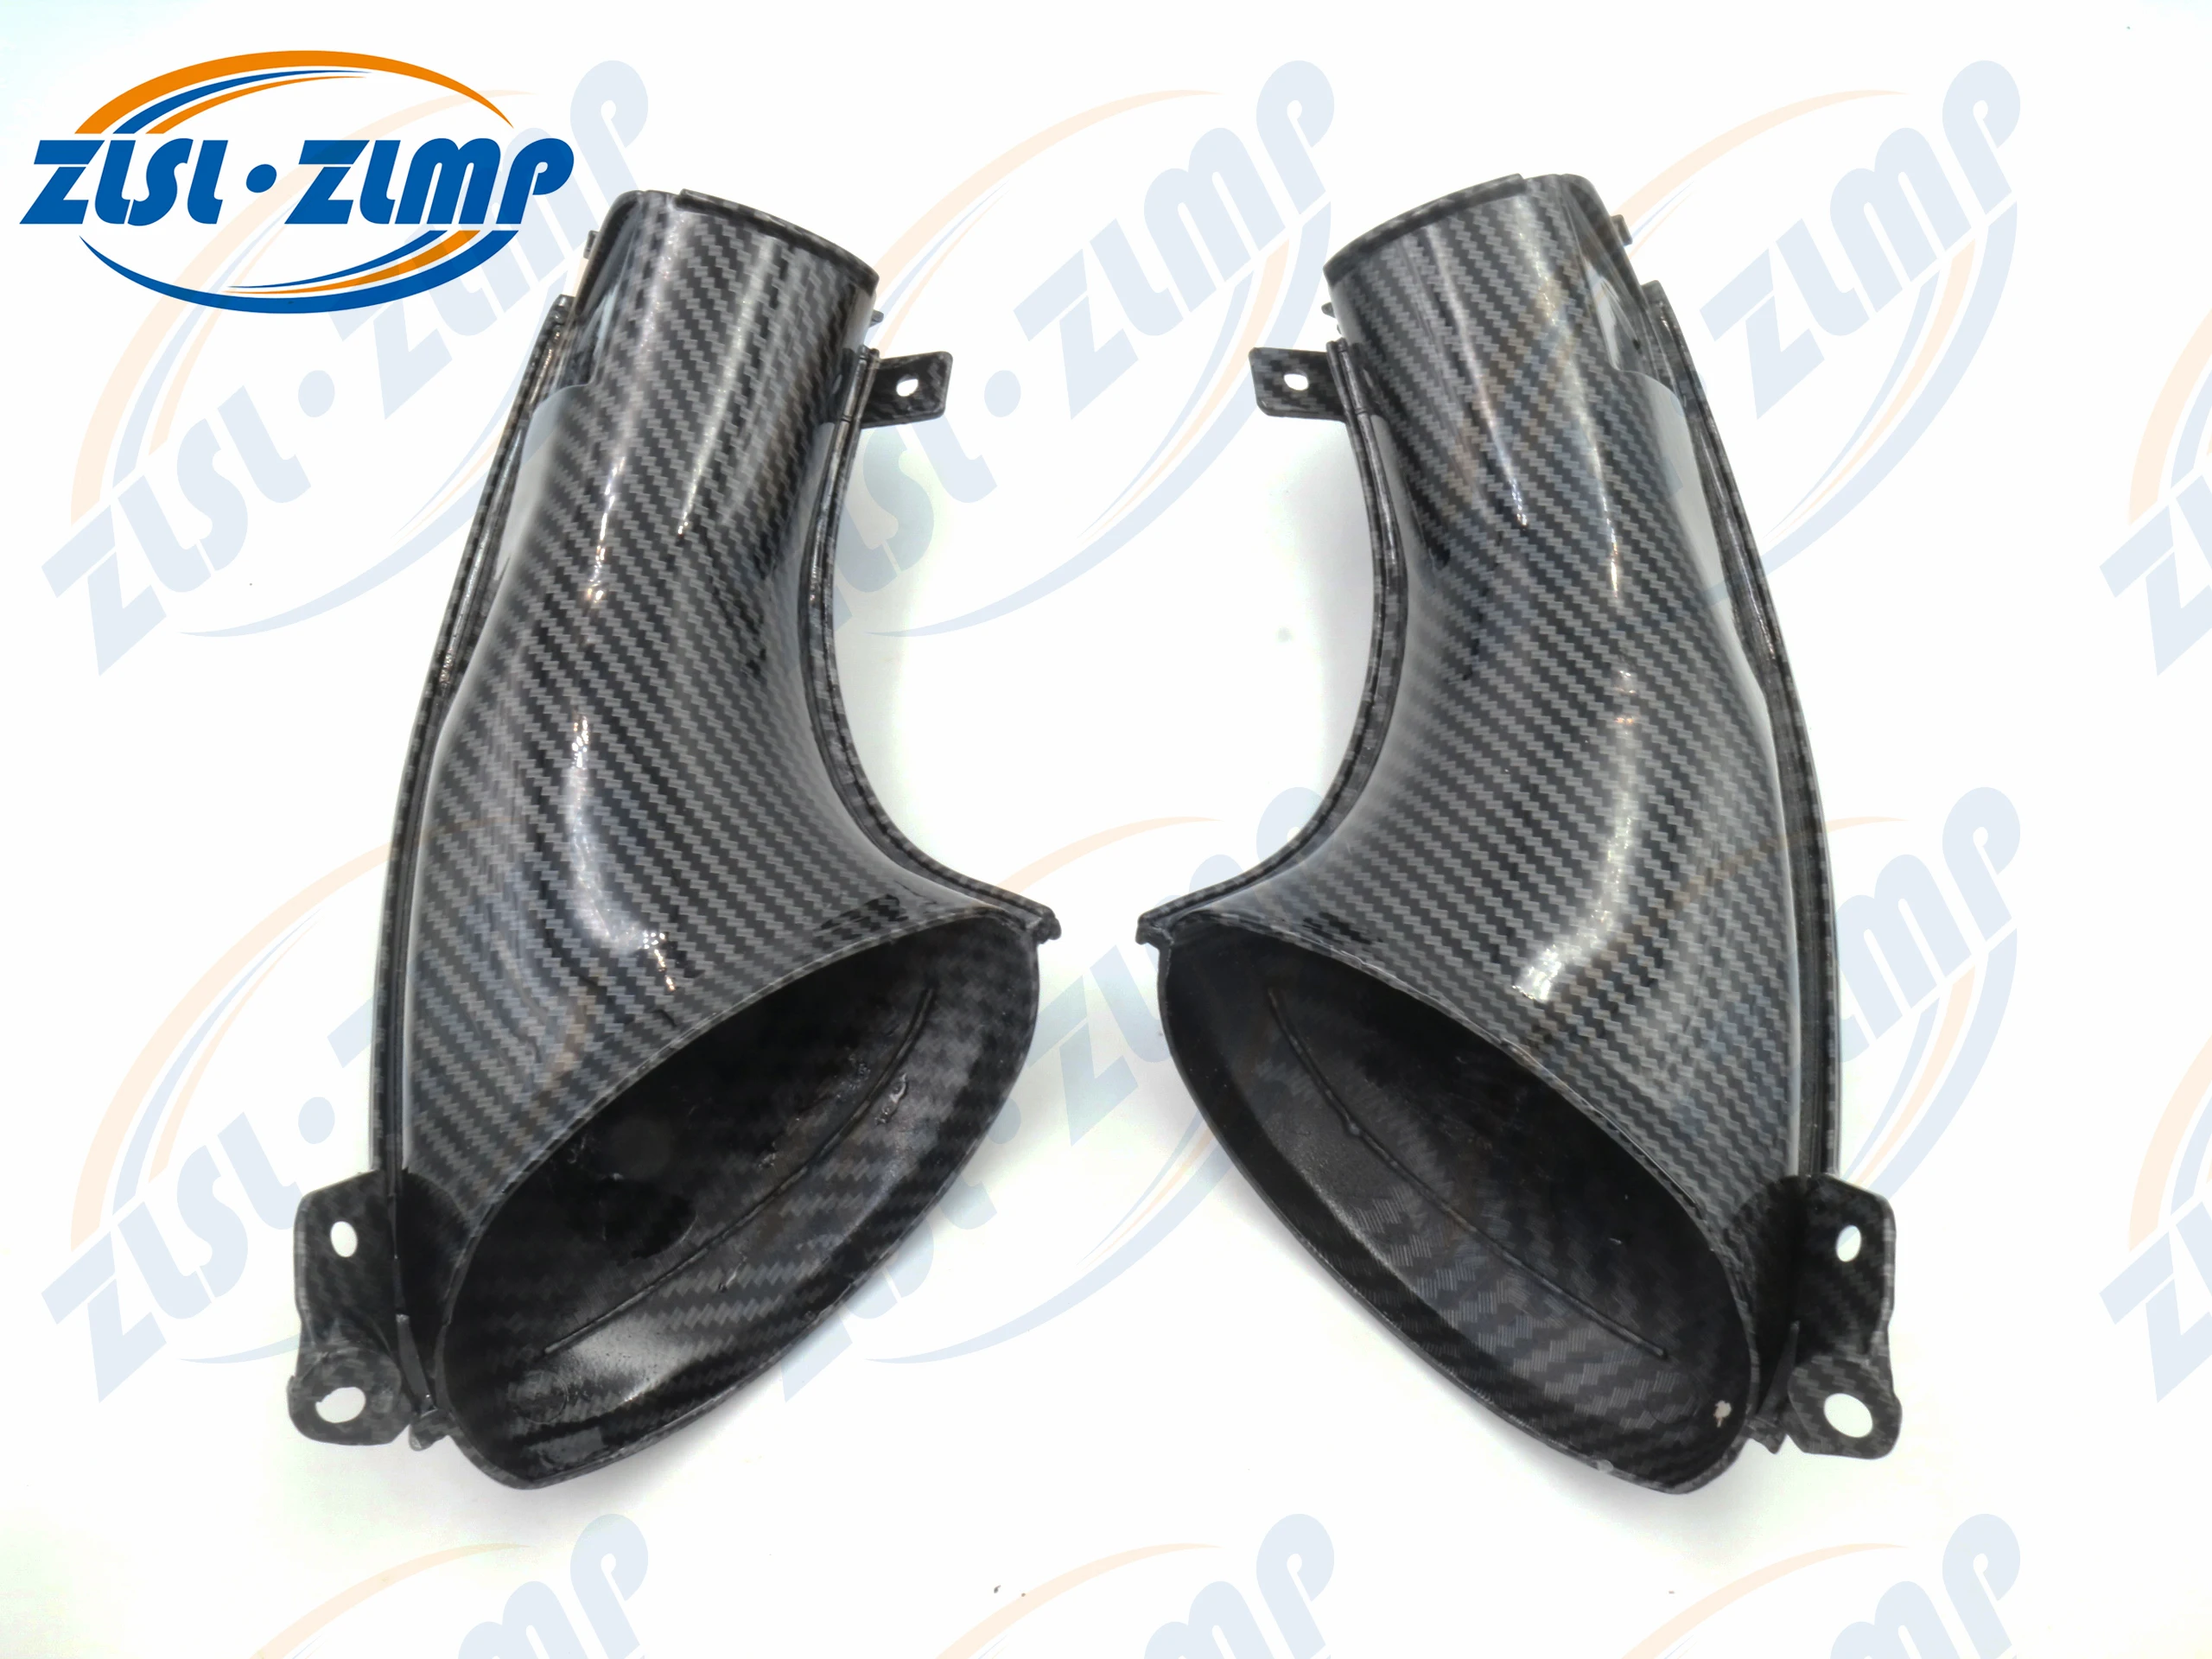 Motorcycle Carbon Fiber Look Ram Air Intake Tube Duct Cover Fairing for Yamaha YZF1000 YZF R1 1000 2007 - 2008